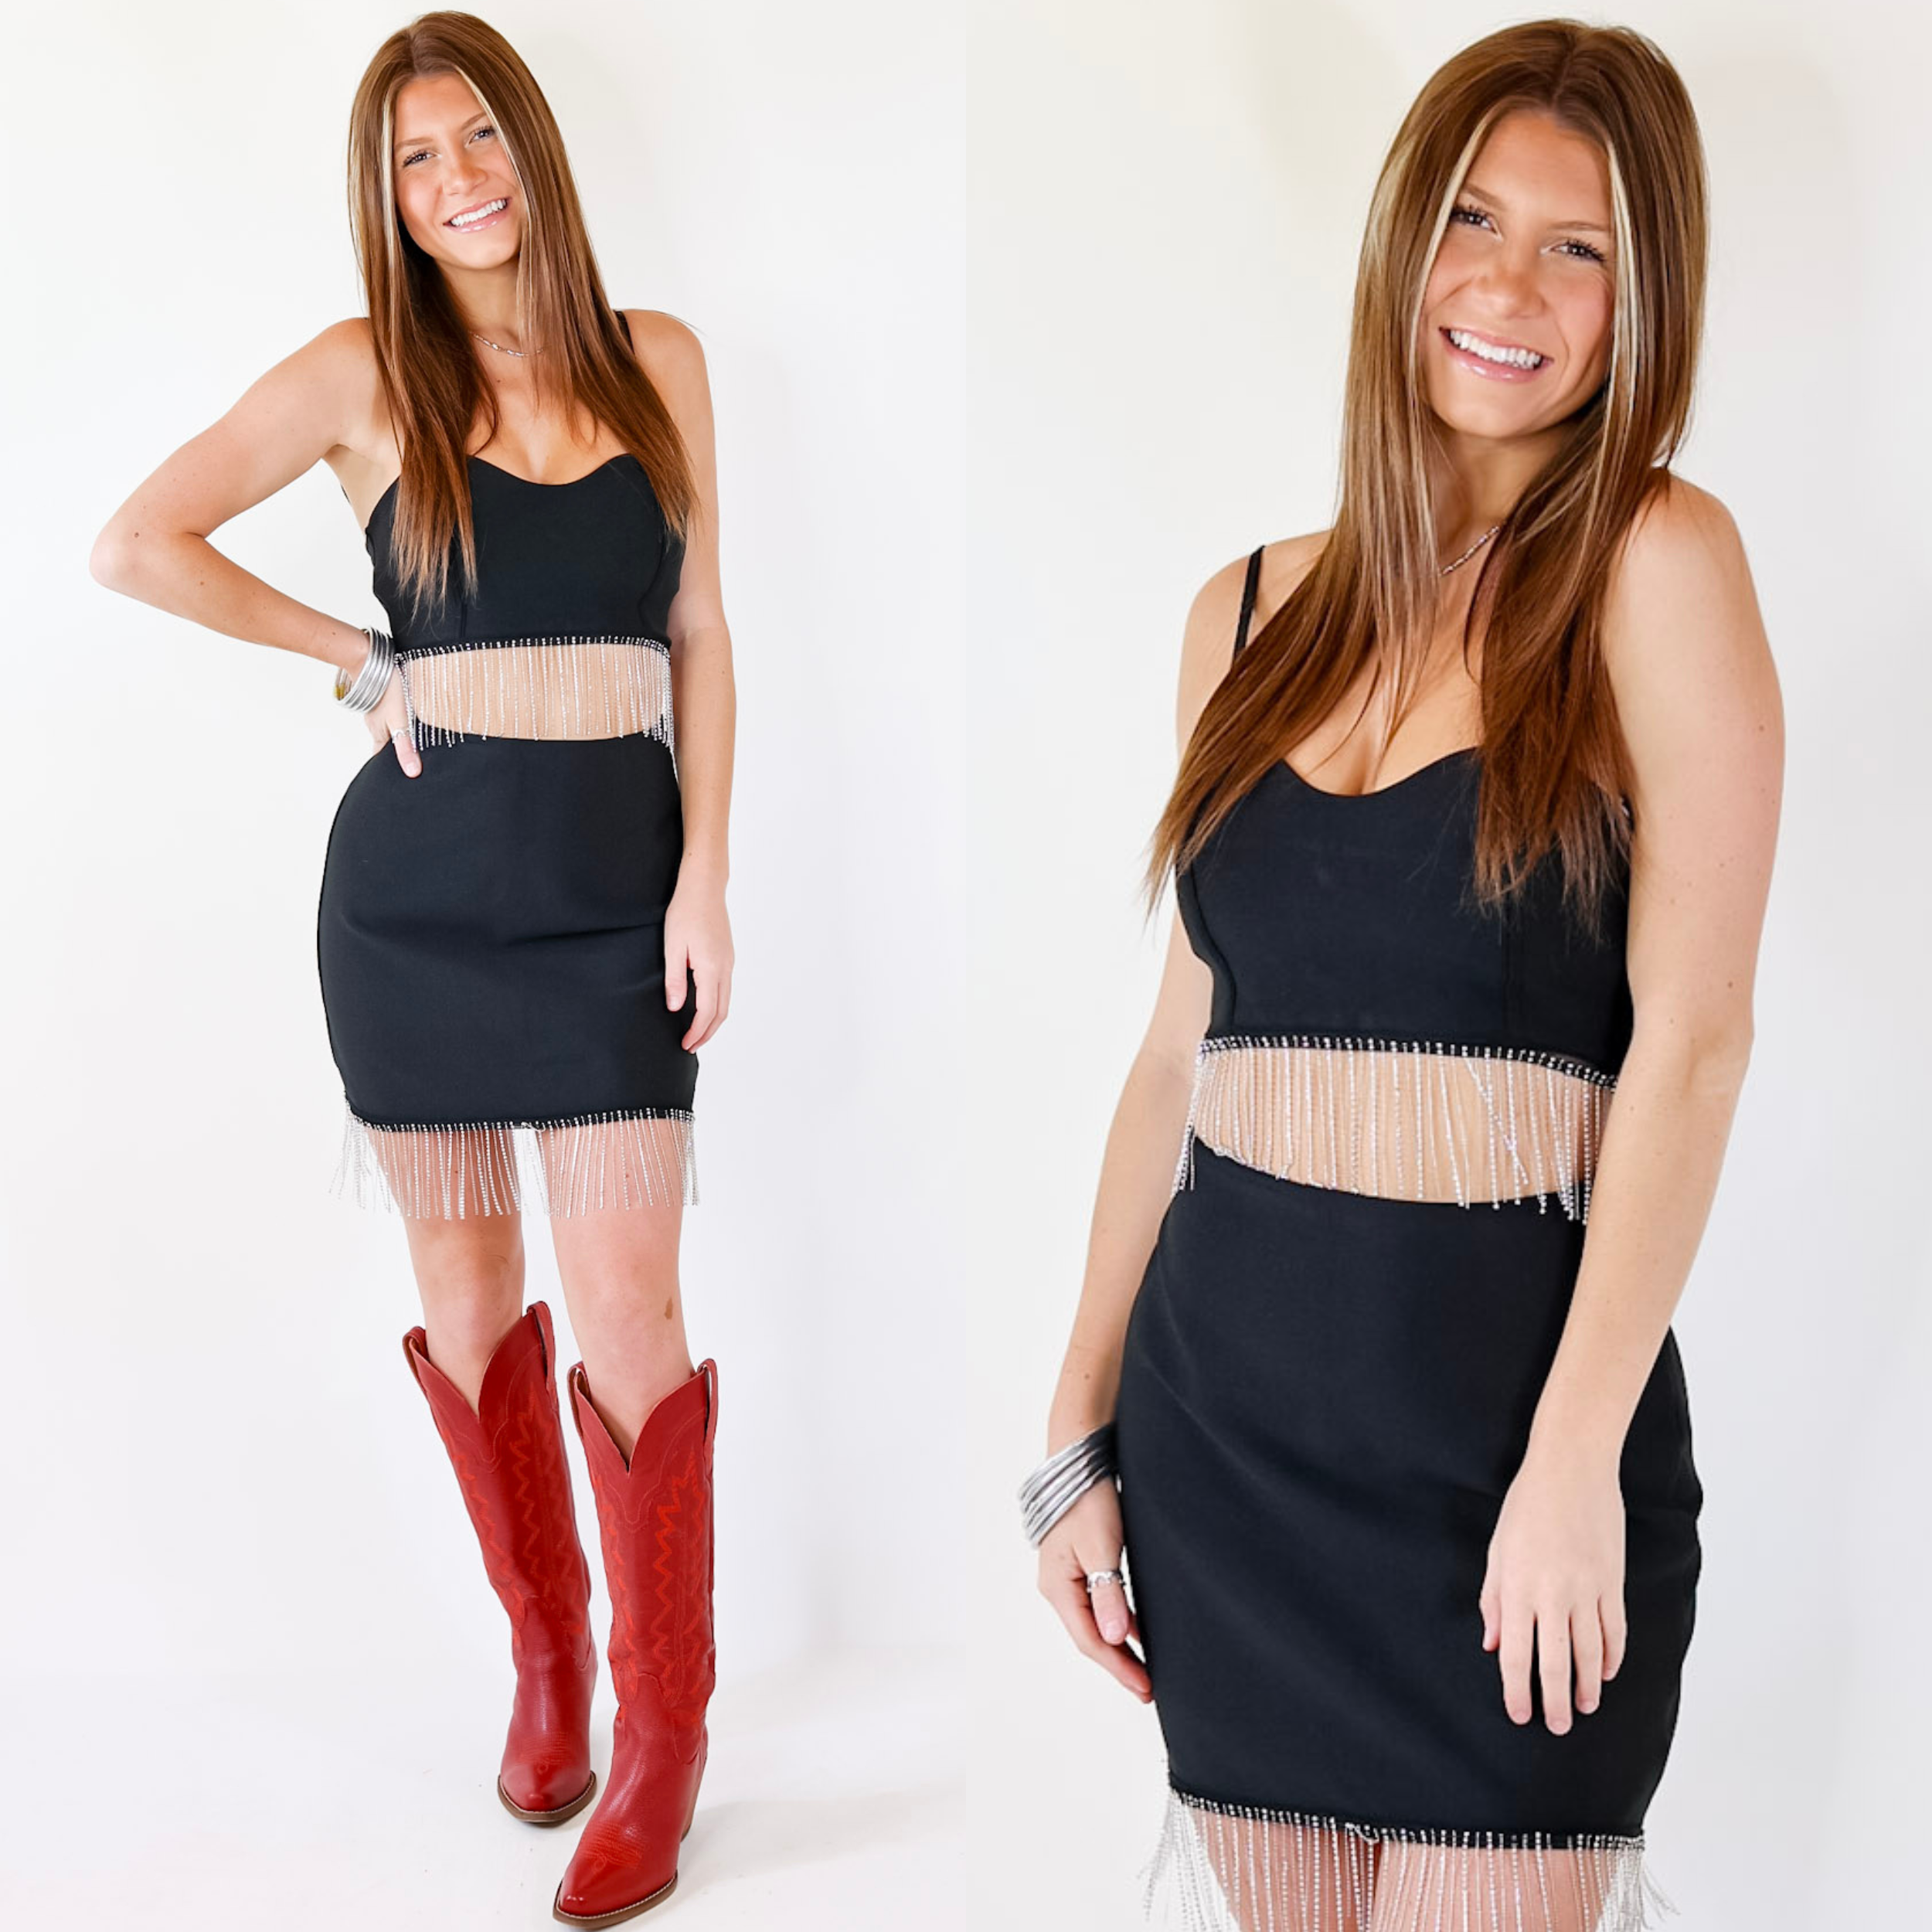 Model is wearing a black crop top with spaghetti straps and crystal fringe. Model has this top paired with a matching skirt, red boots, and silver jewelry.